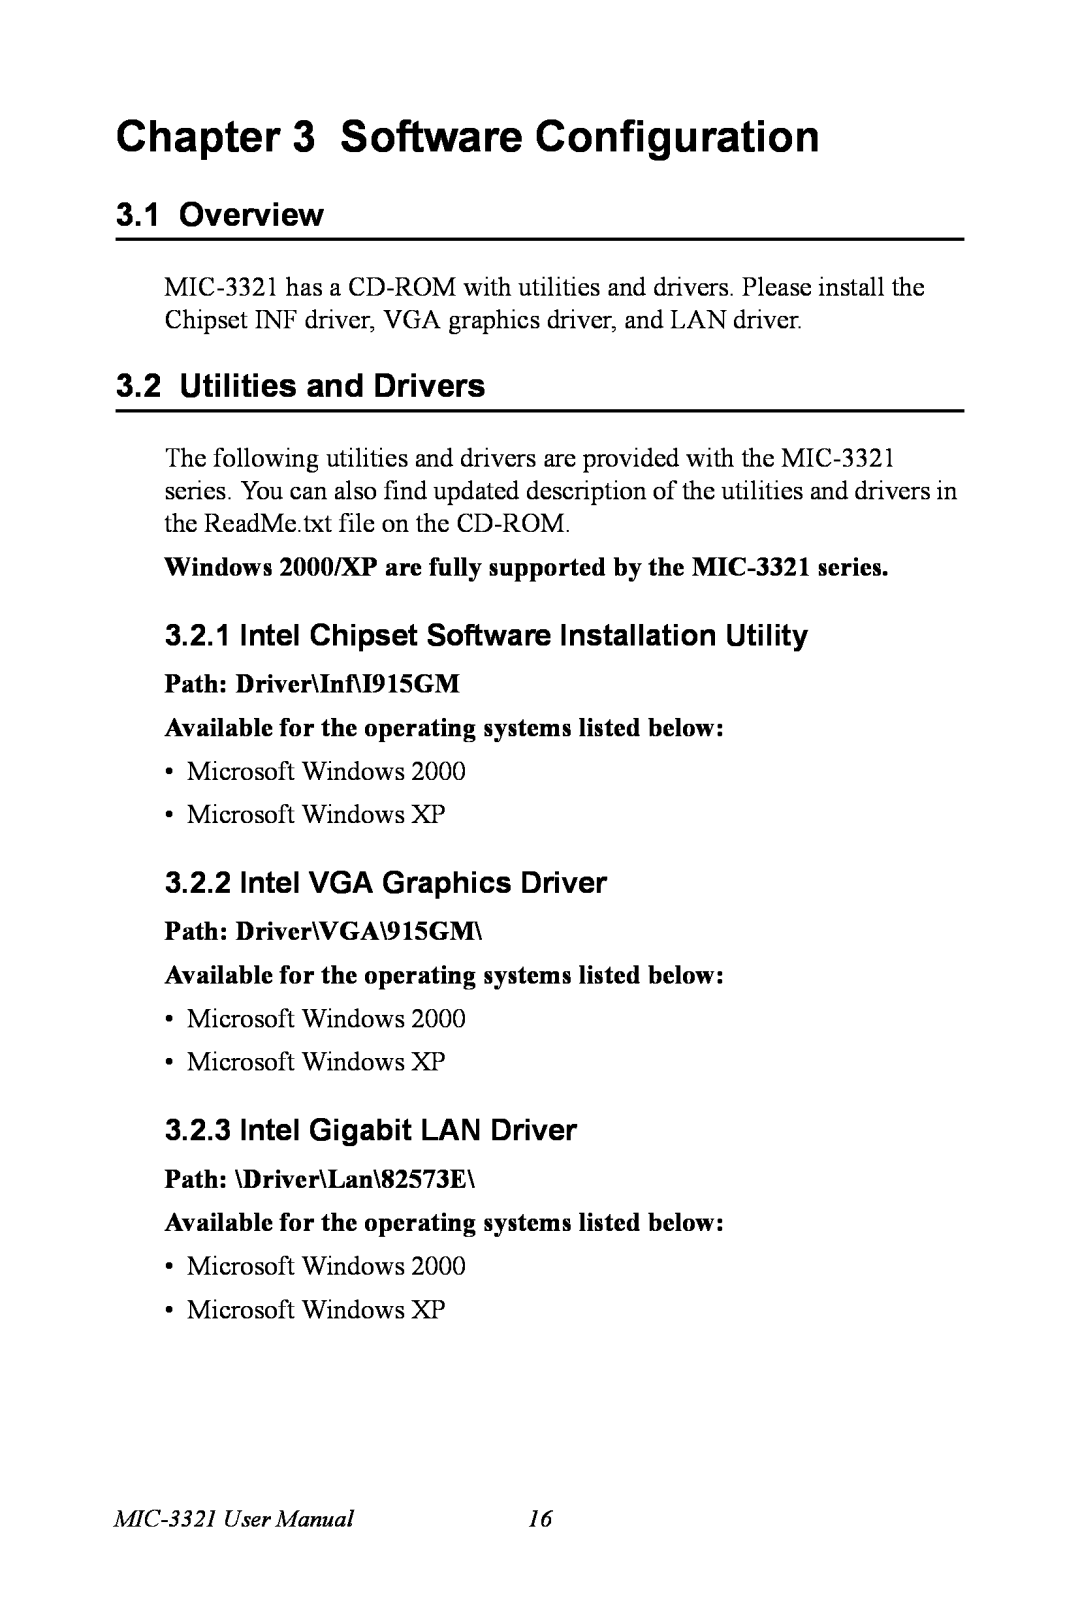 Intel MIC-3321 Software Configuration, Overview, Utilities and Drivers, 3.2.1Intel Chipset Software Installation Utility 